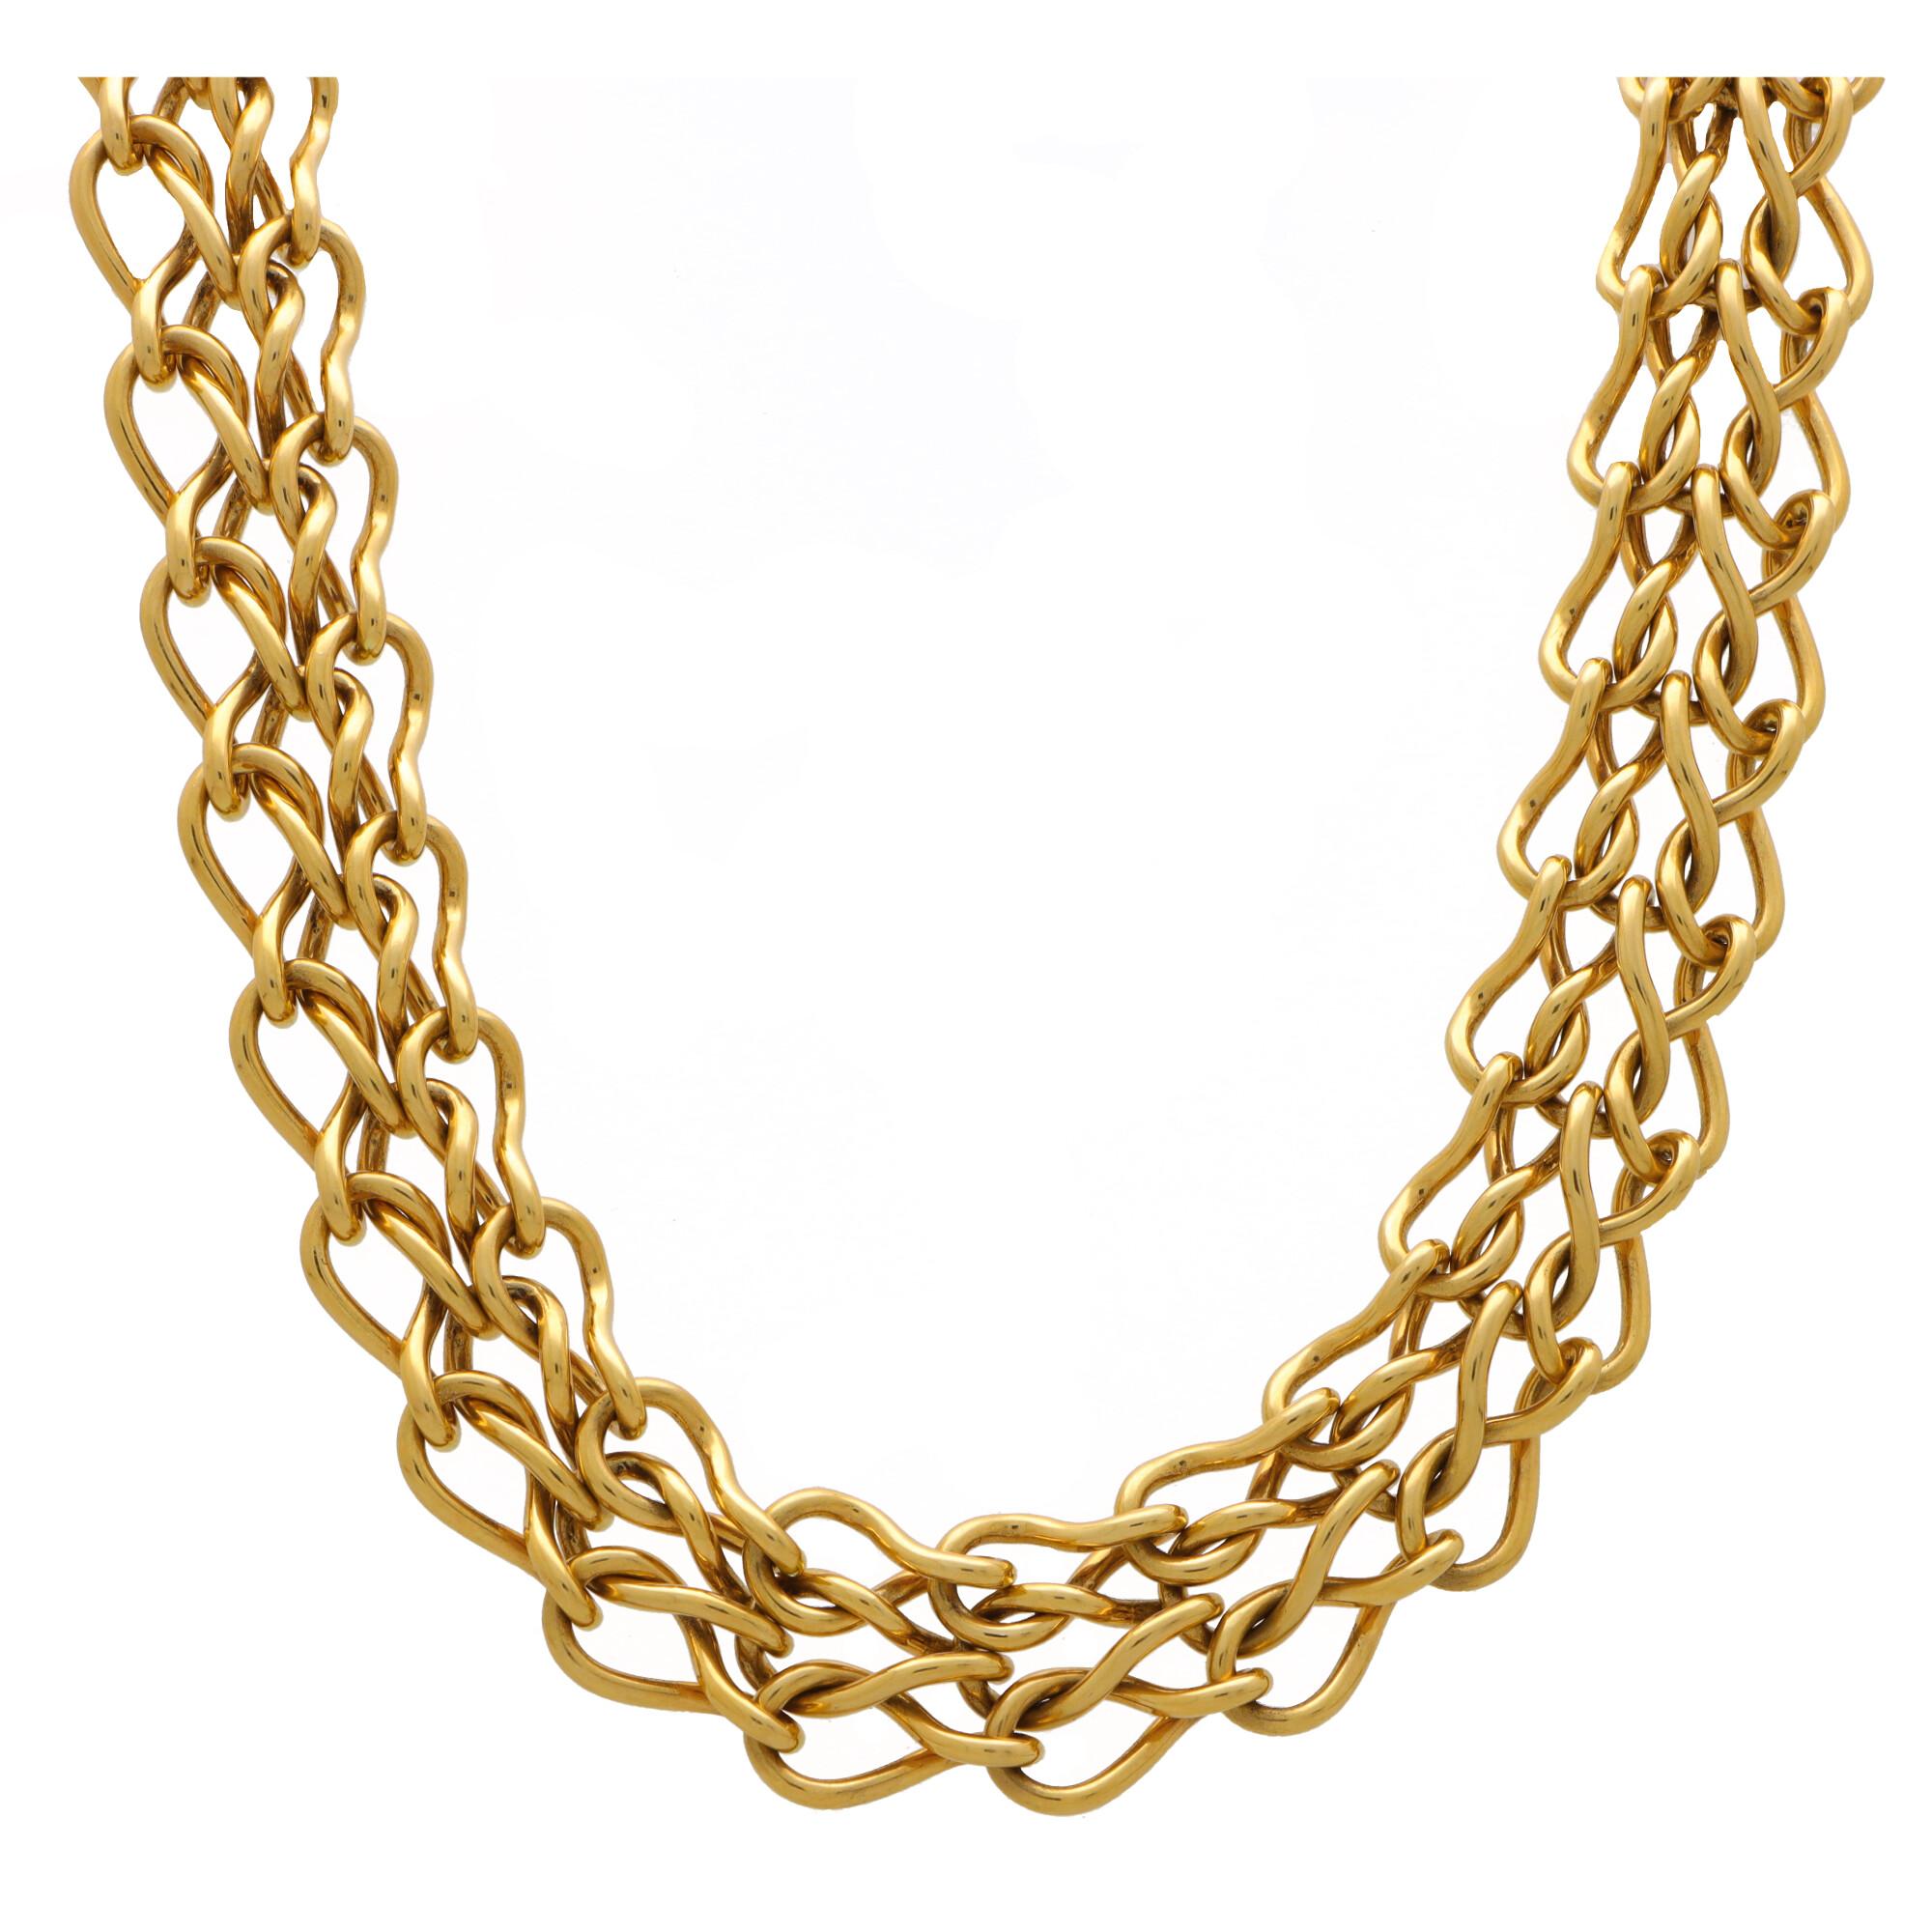 Vintage Cartier Double Twisted Chain Link Necklace Set in 18k Yellow Gold In Excellent Condition For Sale In London, GB